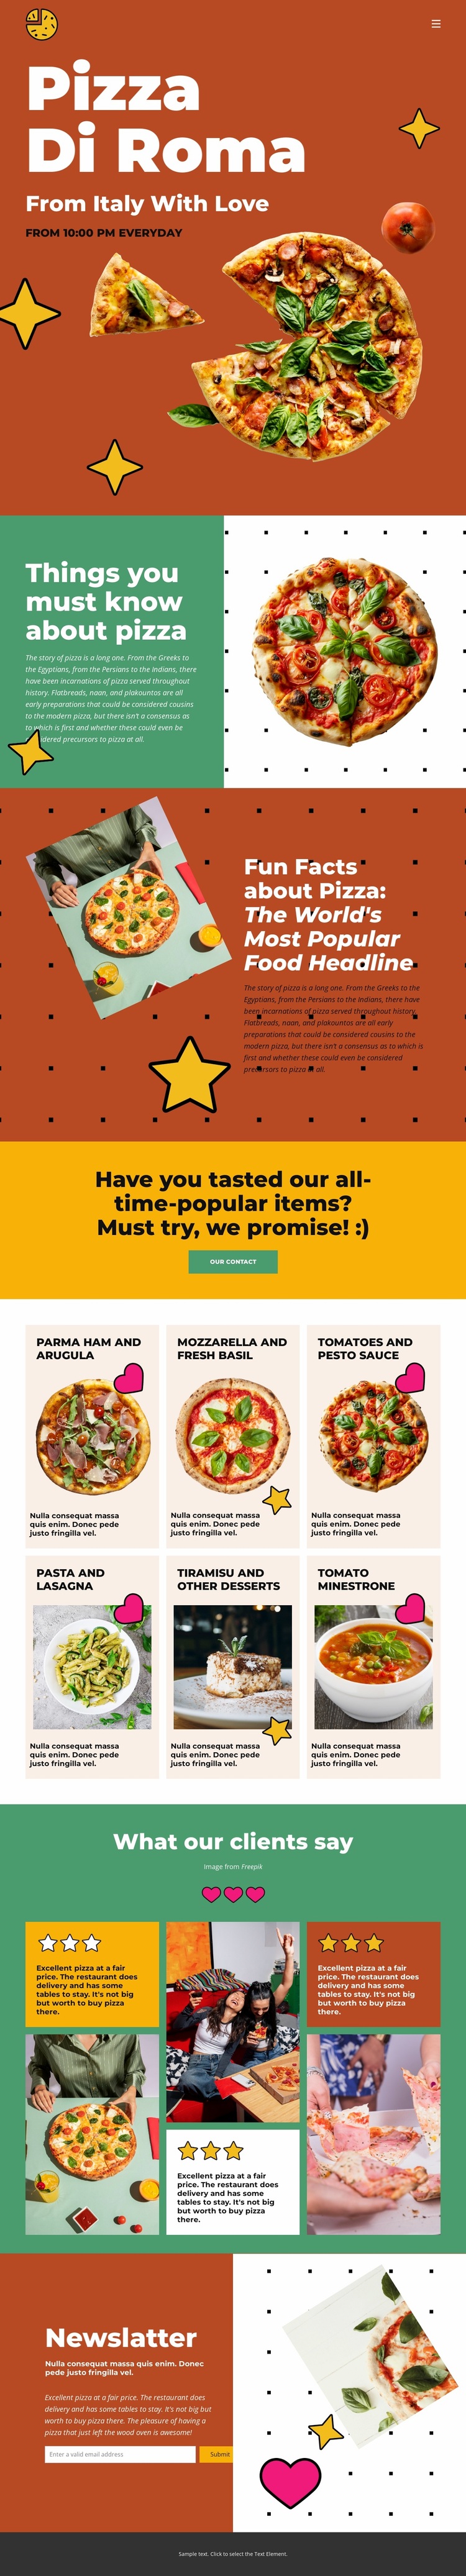 Things you must know about pizza Website Design